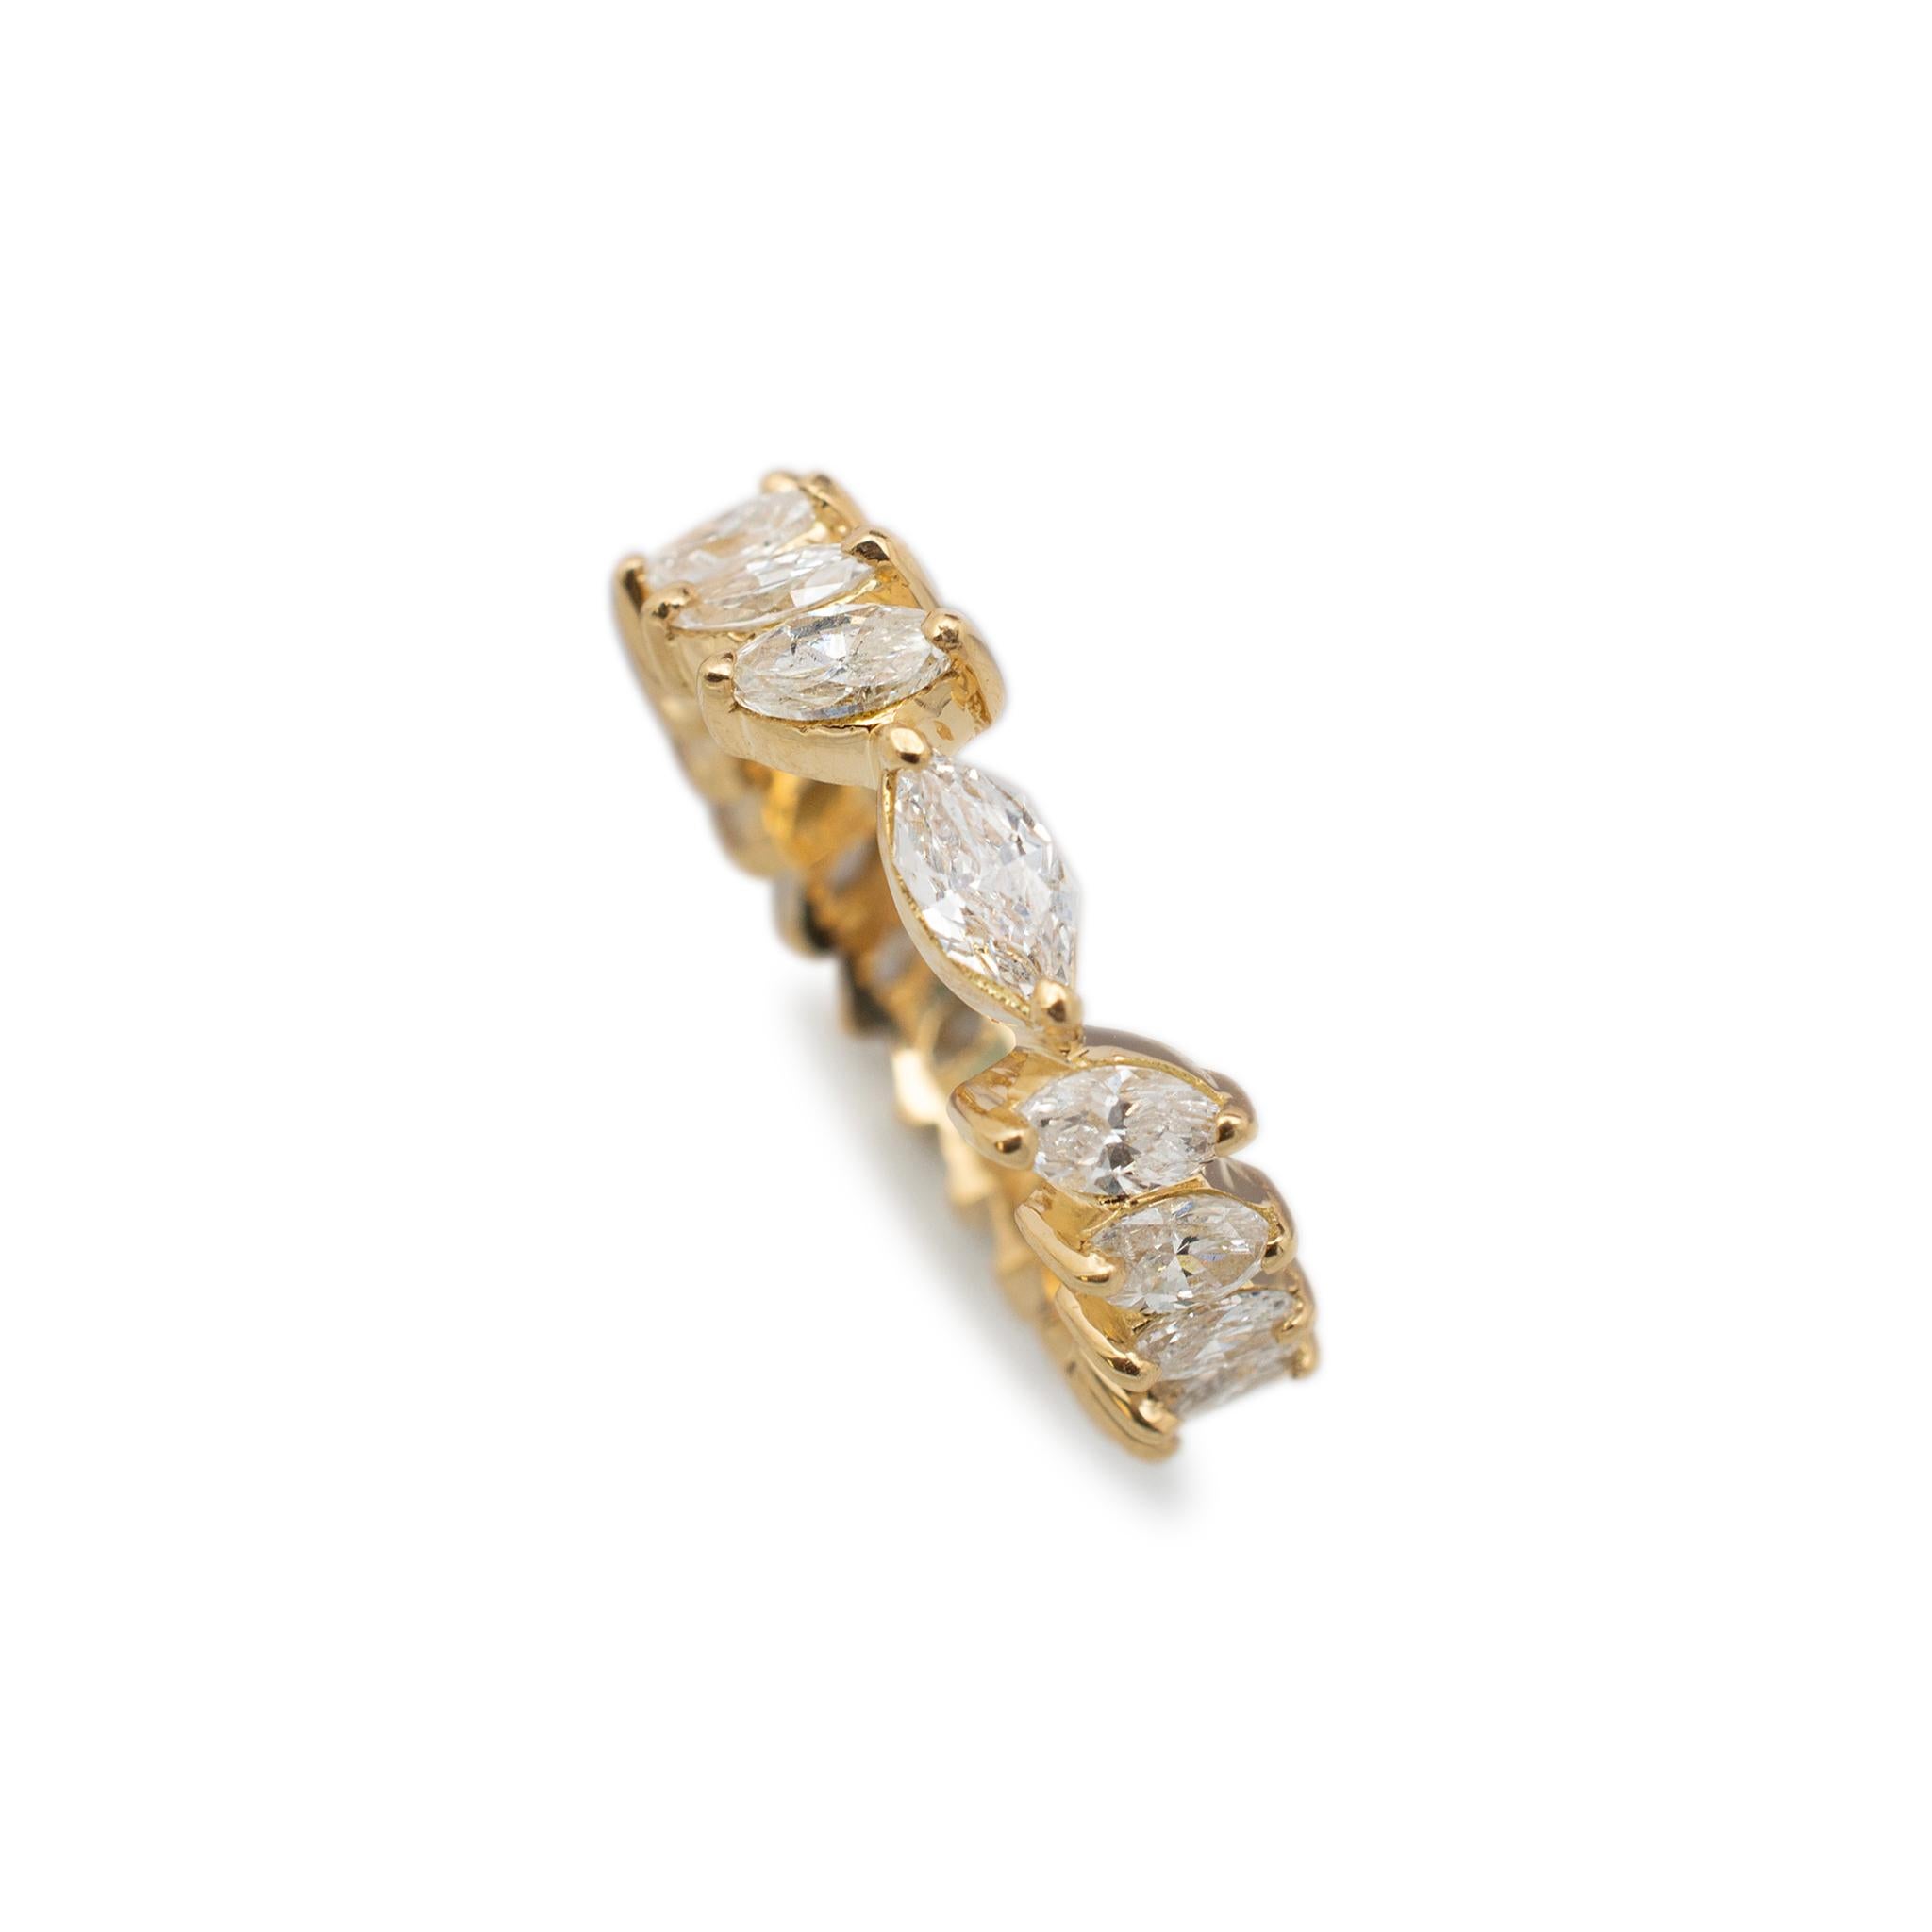 Gender: Ladies

Metal Type: 18K Yellow Gold

Ring Size: 6.5

Width: 6.00 mm

Weight: 5.78 grams

Ladies 18K yellow gold, diamond wedding, eternity band with a comfort-fit shank. The metal was tested and determined to be 18K yellow gold. In excellent